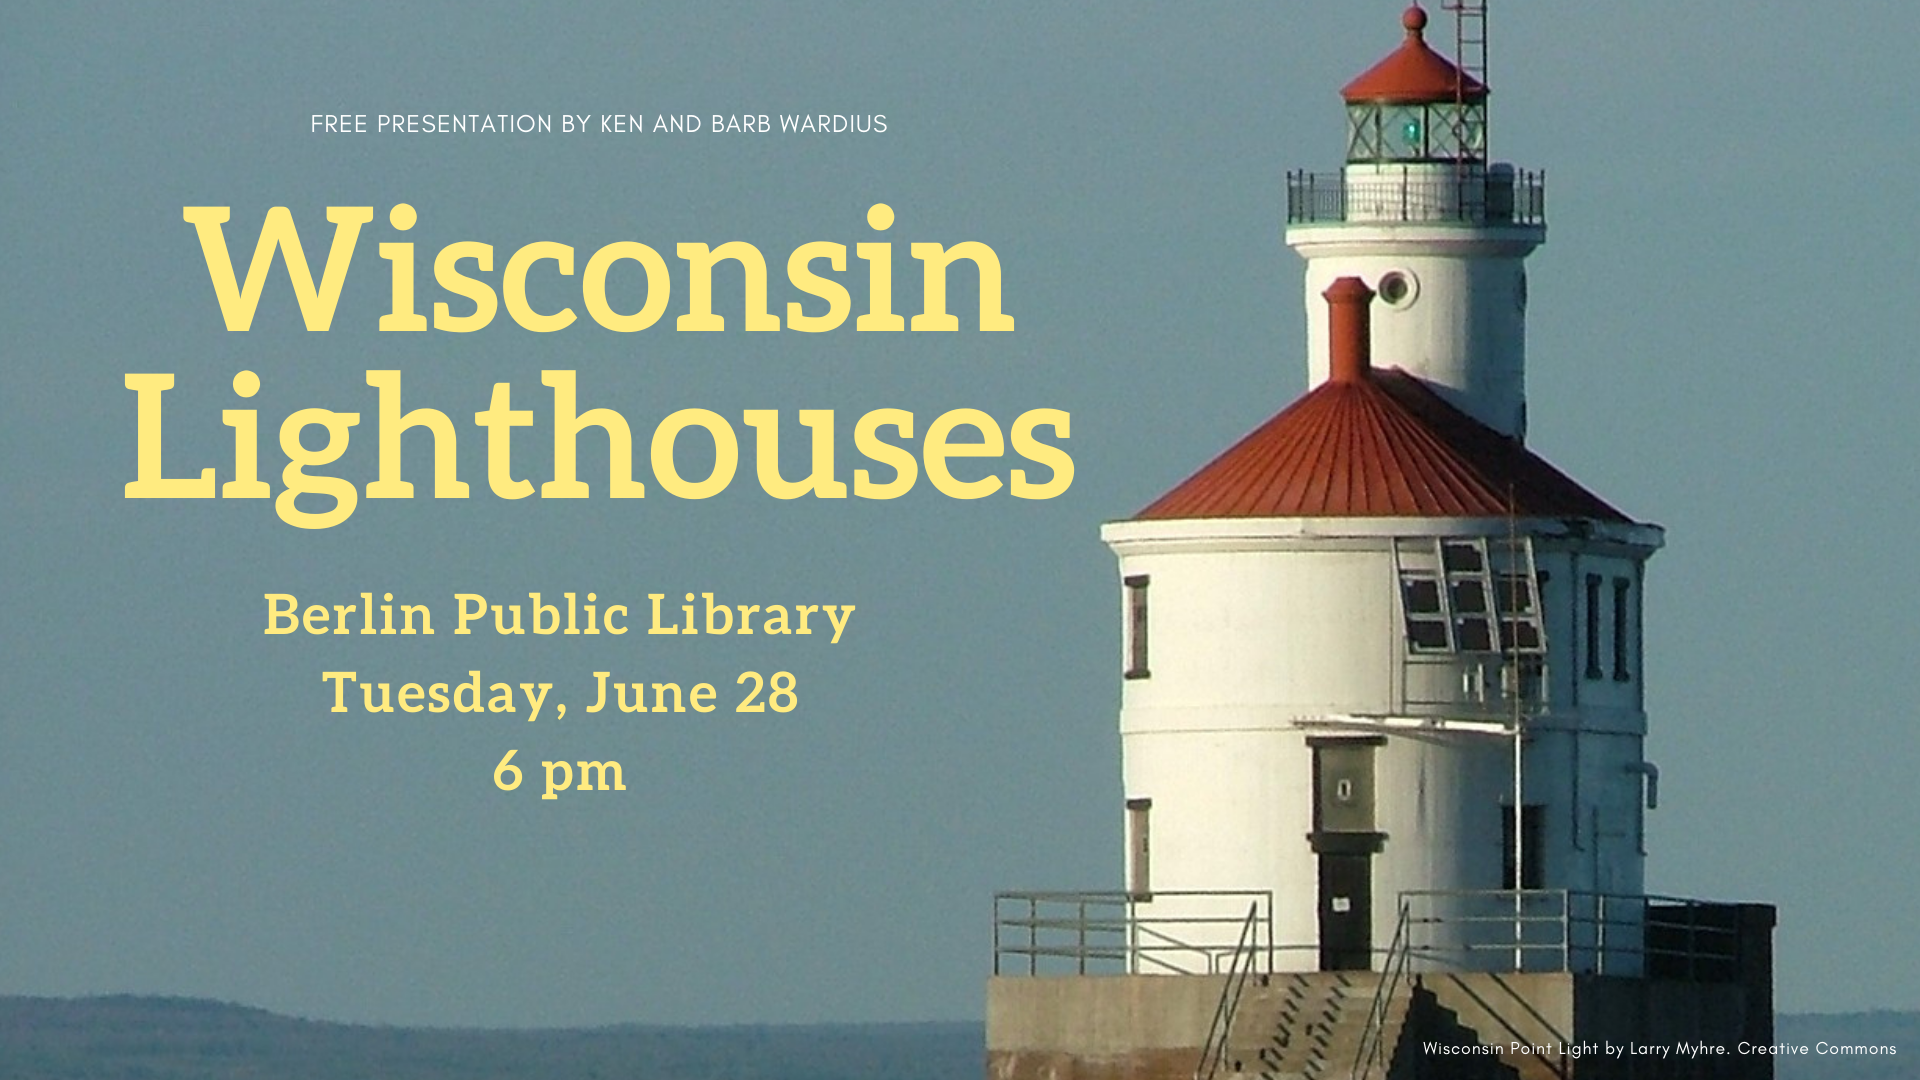 Free presentation by Ken and Barb Wardius: Wisconsin Lighthouses. Berlin Public Library. Tuesday, June 28 at 6 pm